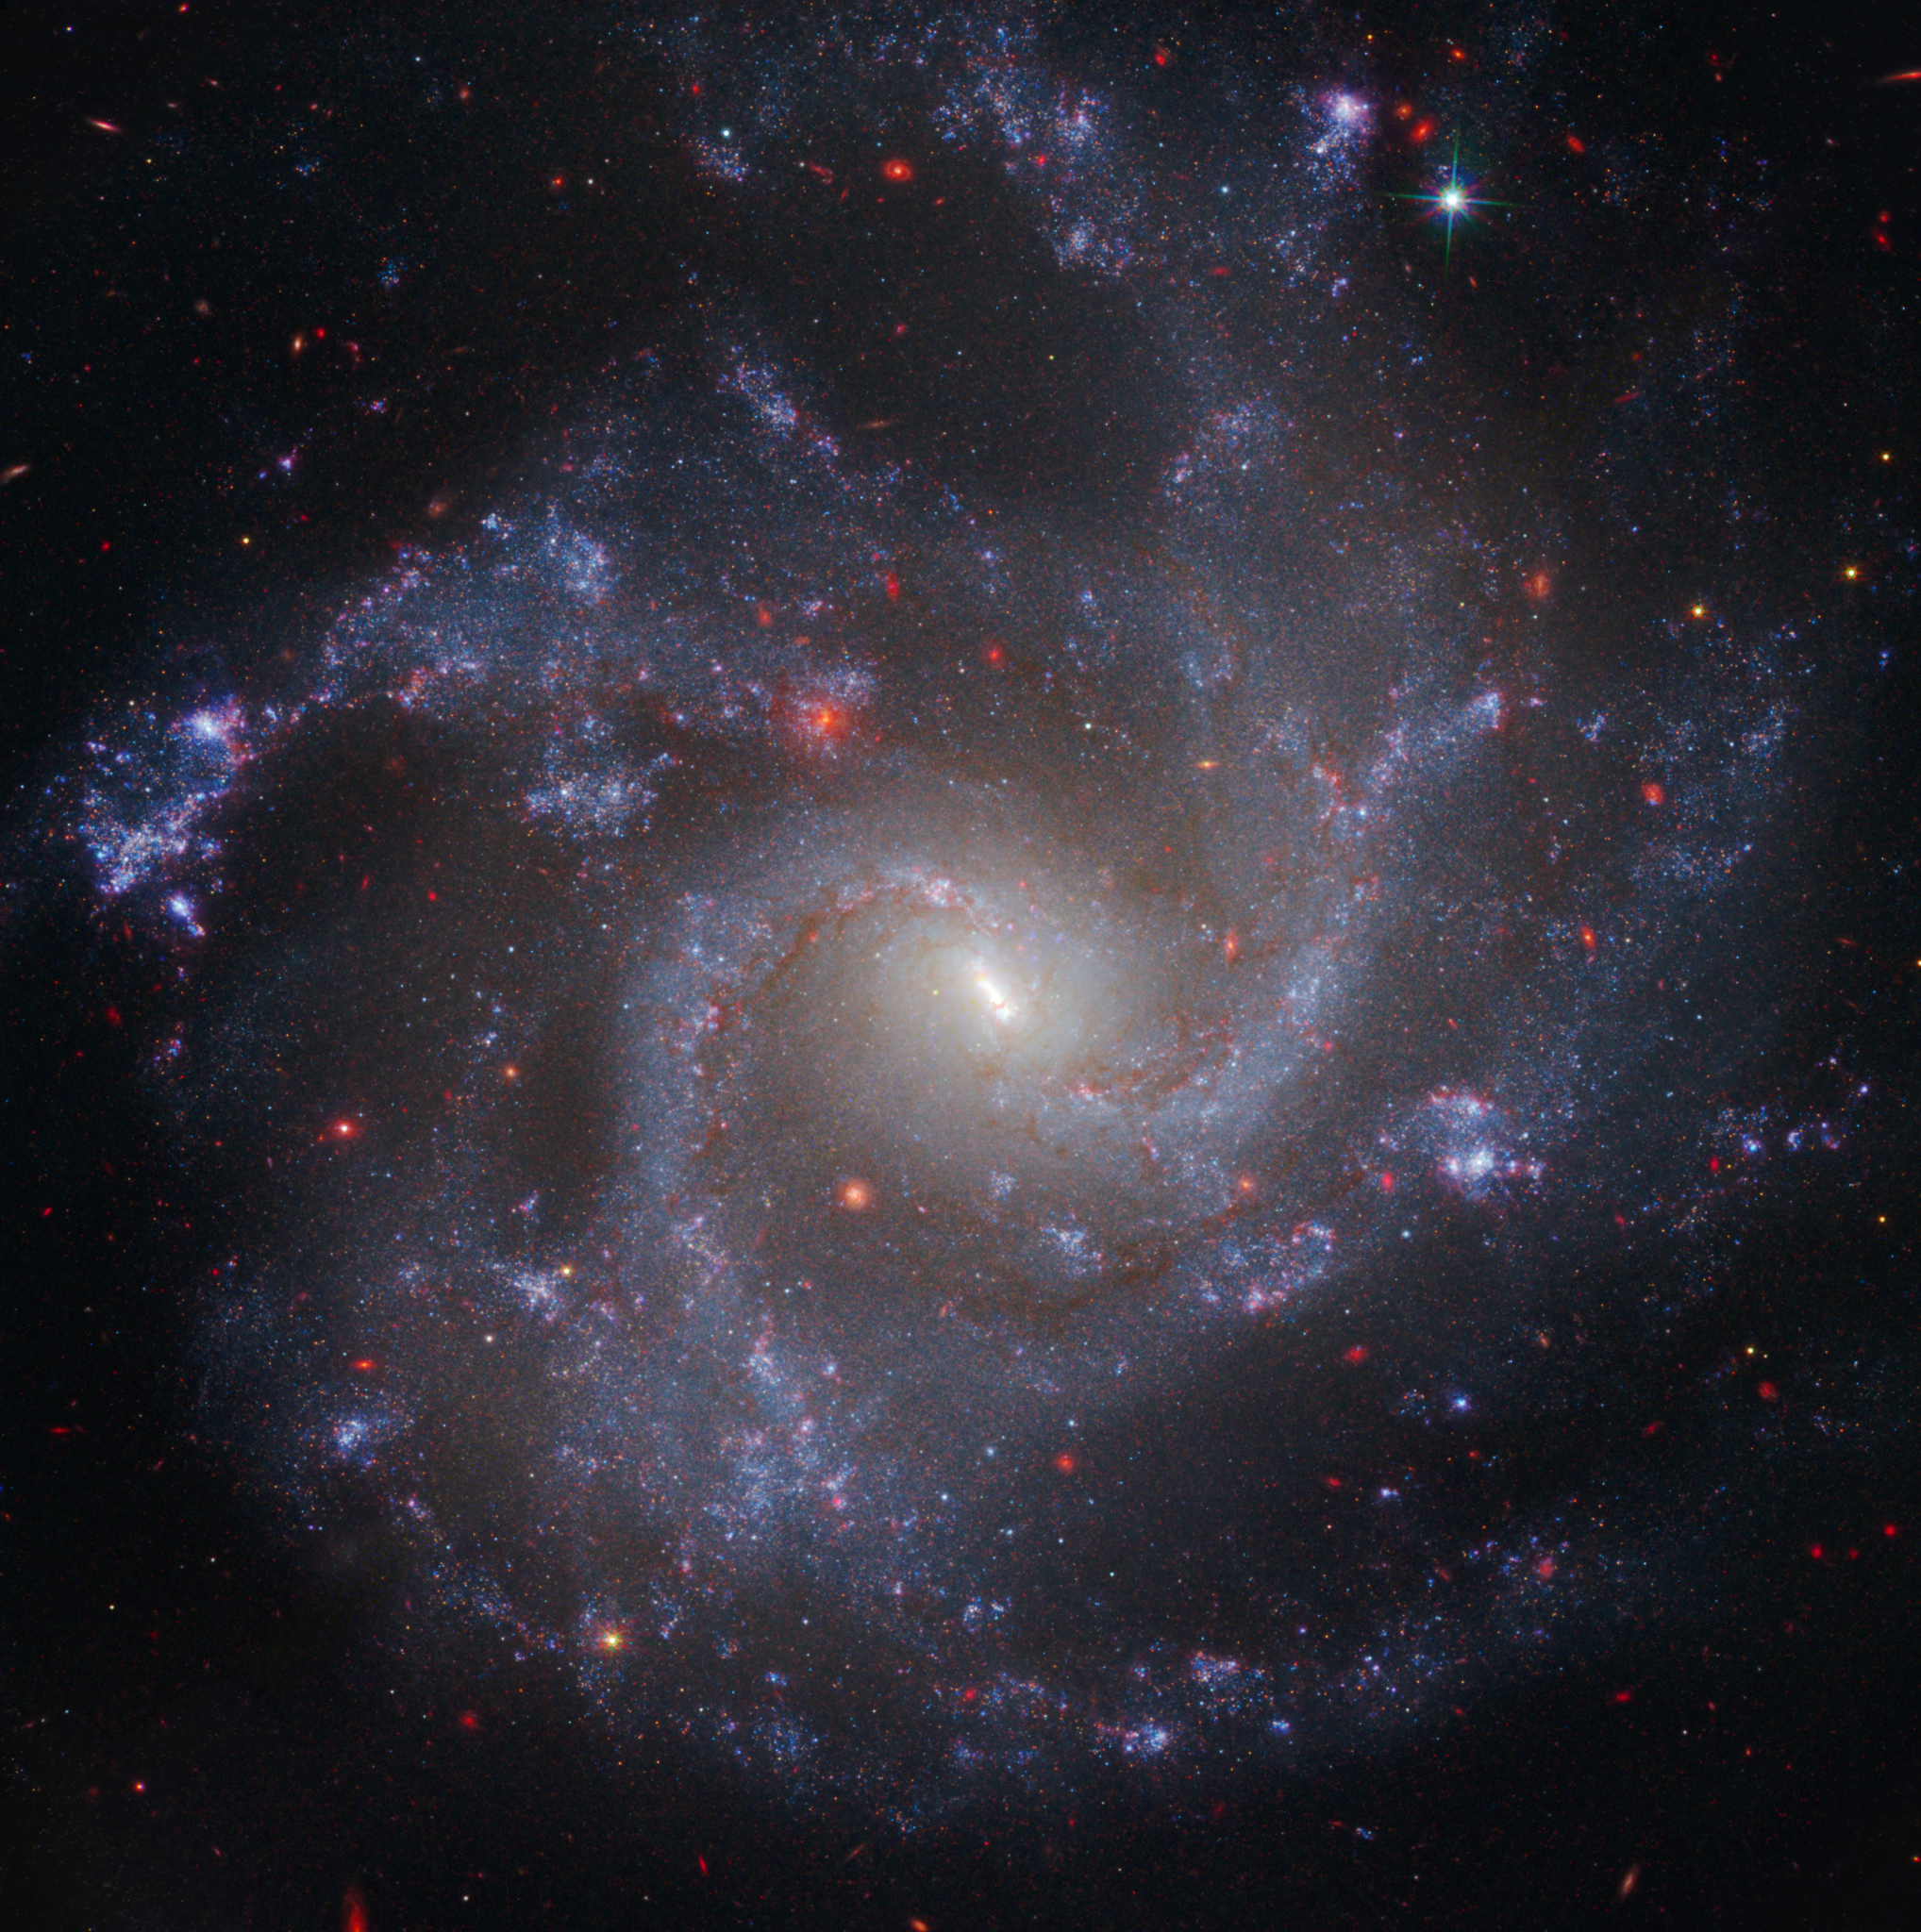 This image of NGC 5468, a galaxy located about 130 million light-years from Earth, combines data from the Hubble and James Webb space telescopes. This is the farthest galaxy in which Hubble has identified Cepheid variable stars. These are important milepost markers for measuring the expansion rate of the universe. The distance calculated from Cepheids has been cross-correlated with a type Ia supernova in the galaxy. Type Ia supernovae are so bright they are used to measure cosmic distances far beyond the range of the Cepheids, extending measurements of the universe's expansion rate deeper into space.